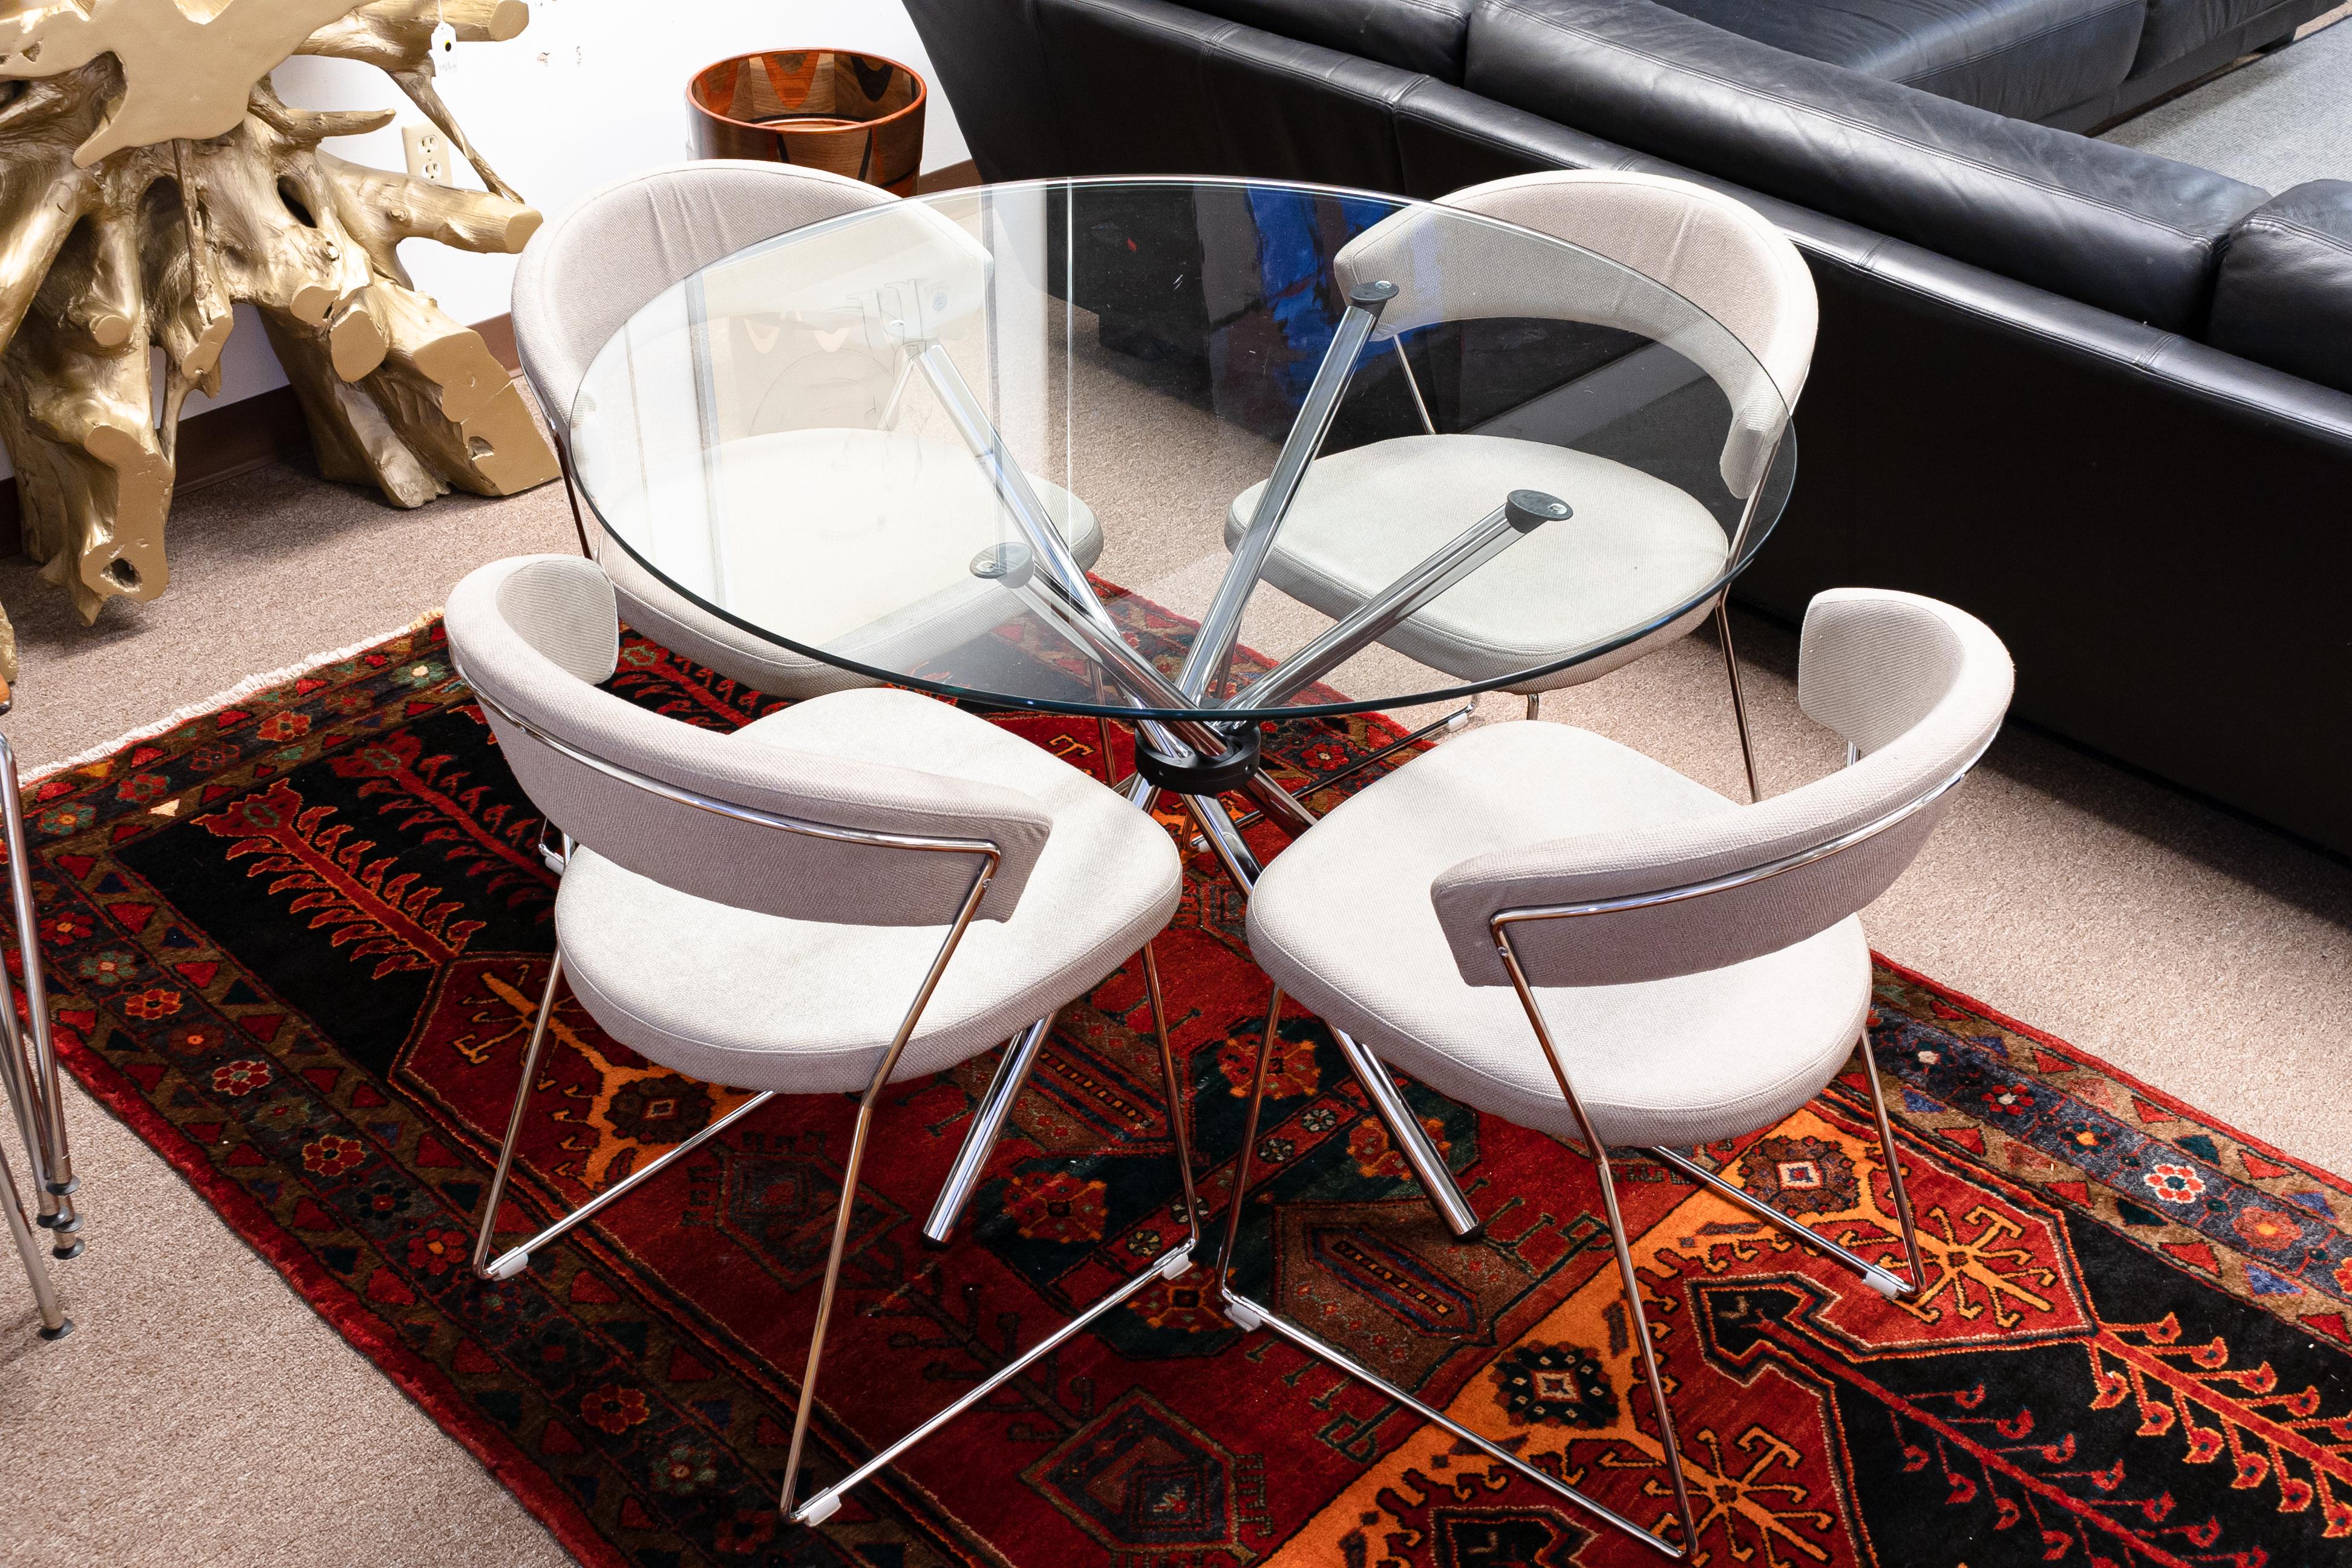 A round polished chrome and glass dinette gallery base table and a set of four Calligaris chairs. This dinette set is in very good vintage condition. It features a very unique glass dinette table with gallery style legs. The construction is very